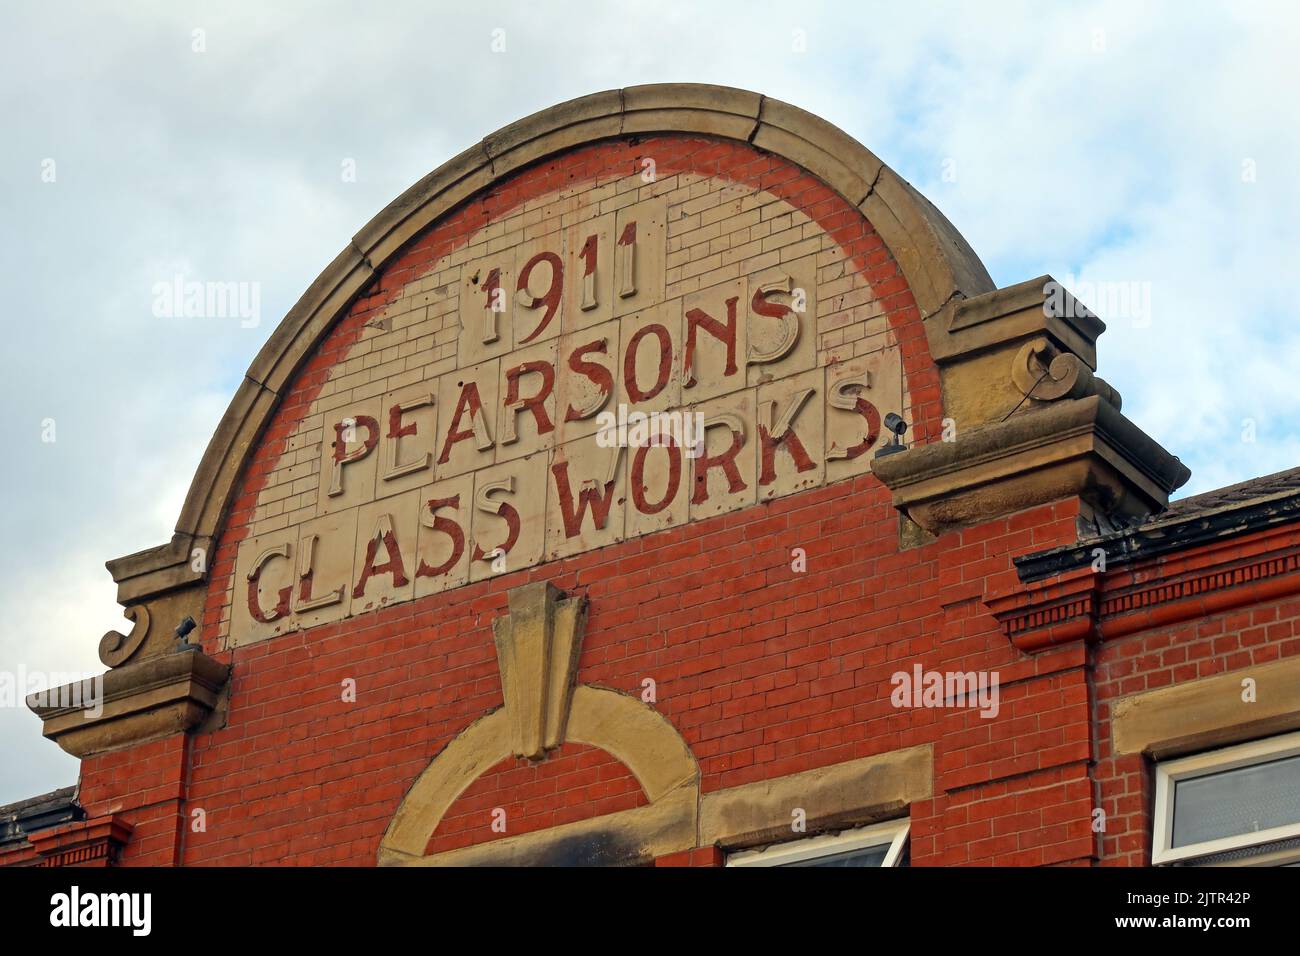 1911 Pearsons Glass Works Building - 2, Empire Street, abseits der Cheetham Hill Road, Manchester, England, UK, M3 1JA, Jetzt Empire House Bankett Stockfoto